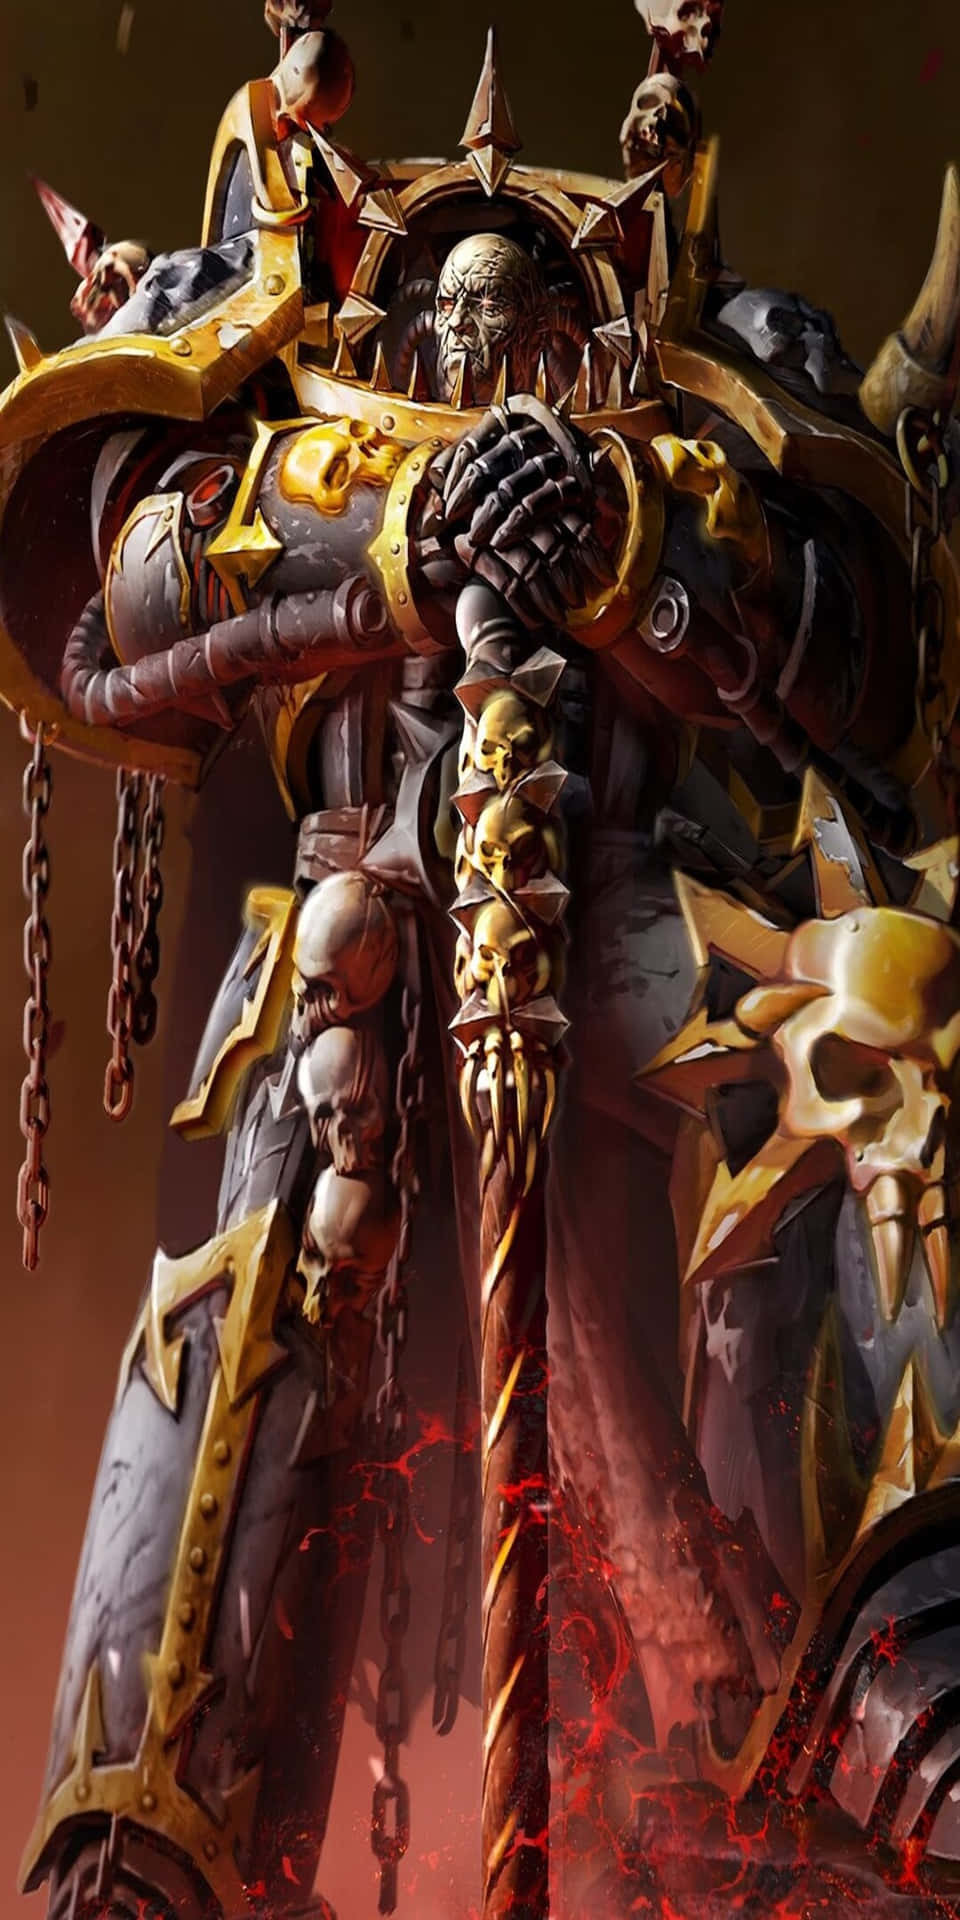 A Warhammer Character With A Sword And A Skull